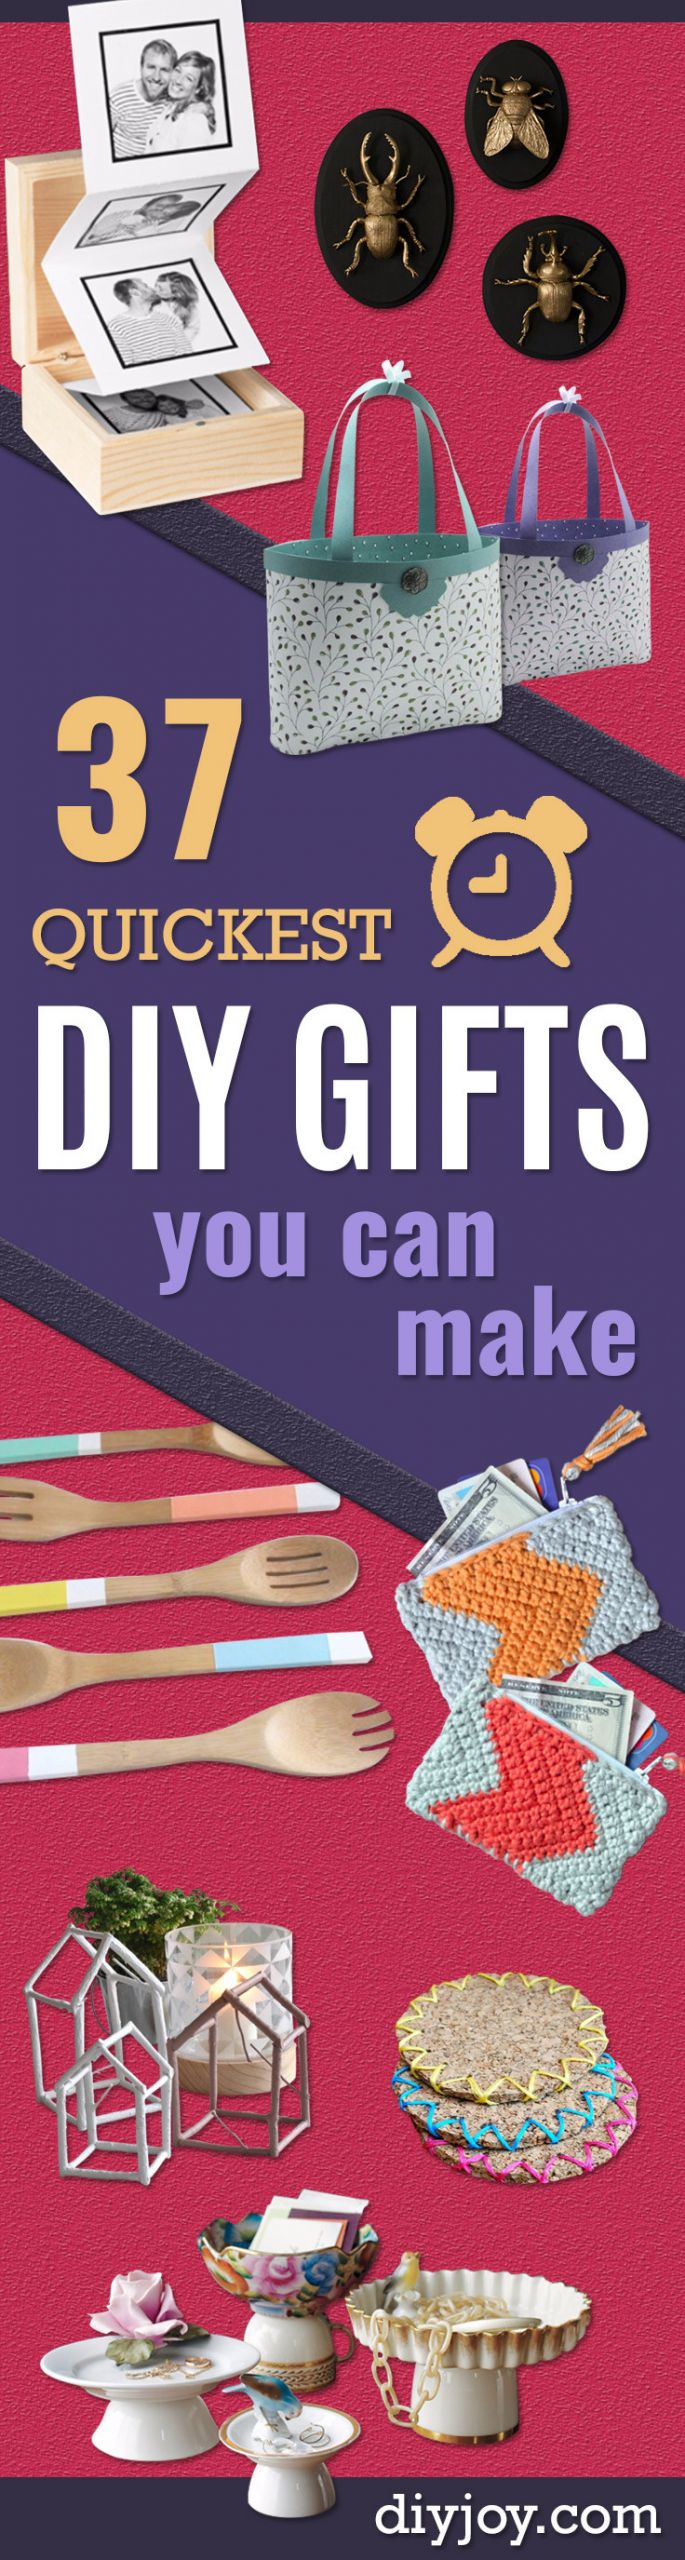 Fast Birthday Gift Ideas
 37 Quickest DIY Gifts You Can Make